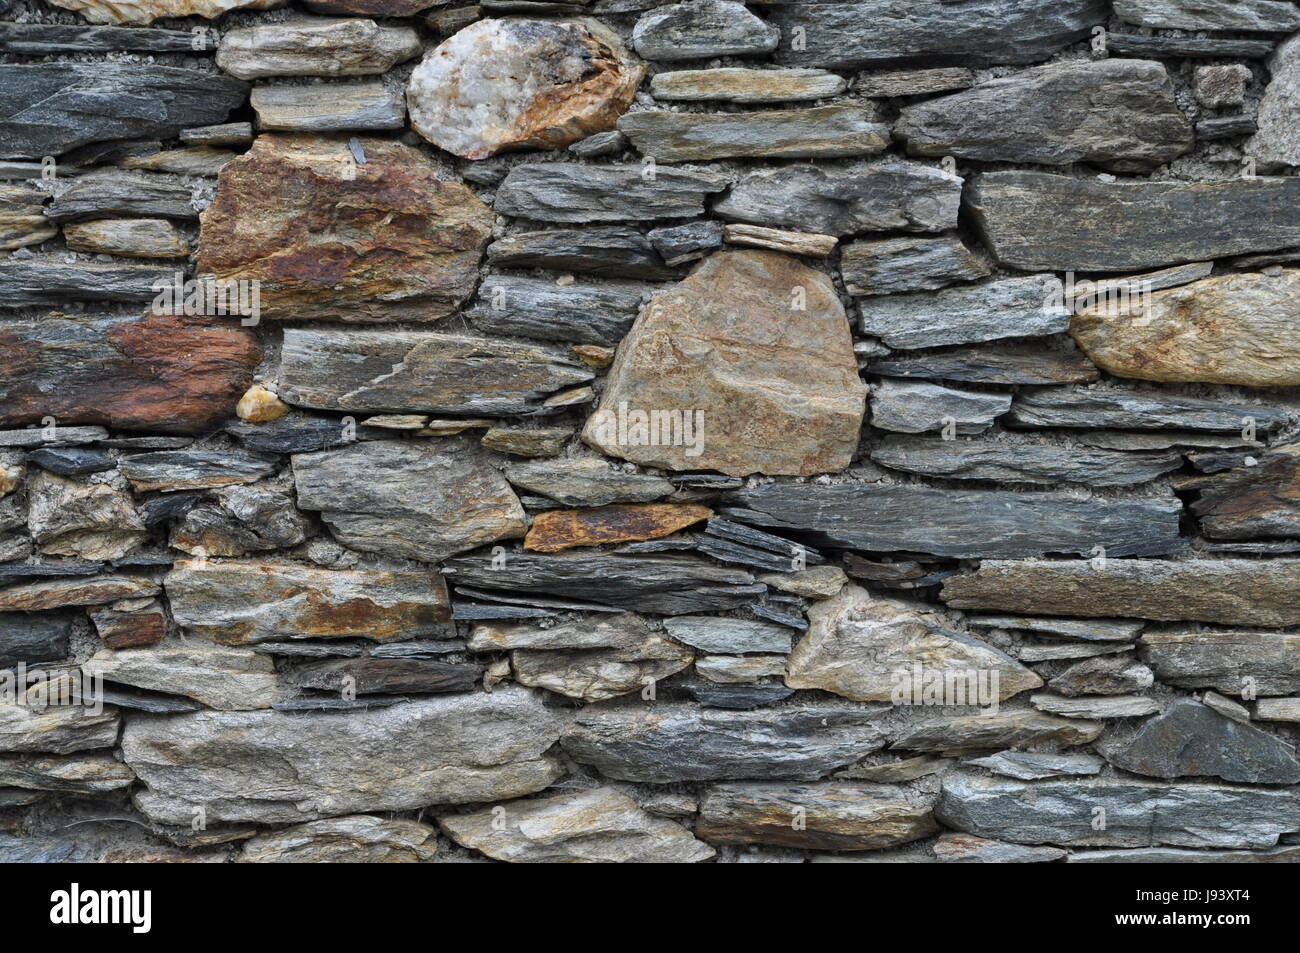 stone, wall, house wall, stonewall, stones, rustical, rustic, natursteinmauer, Stock Photo